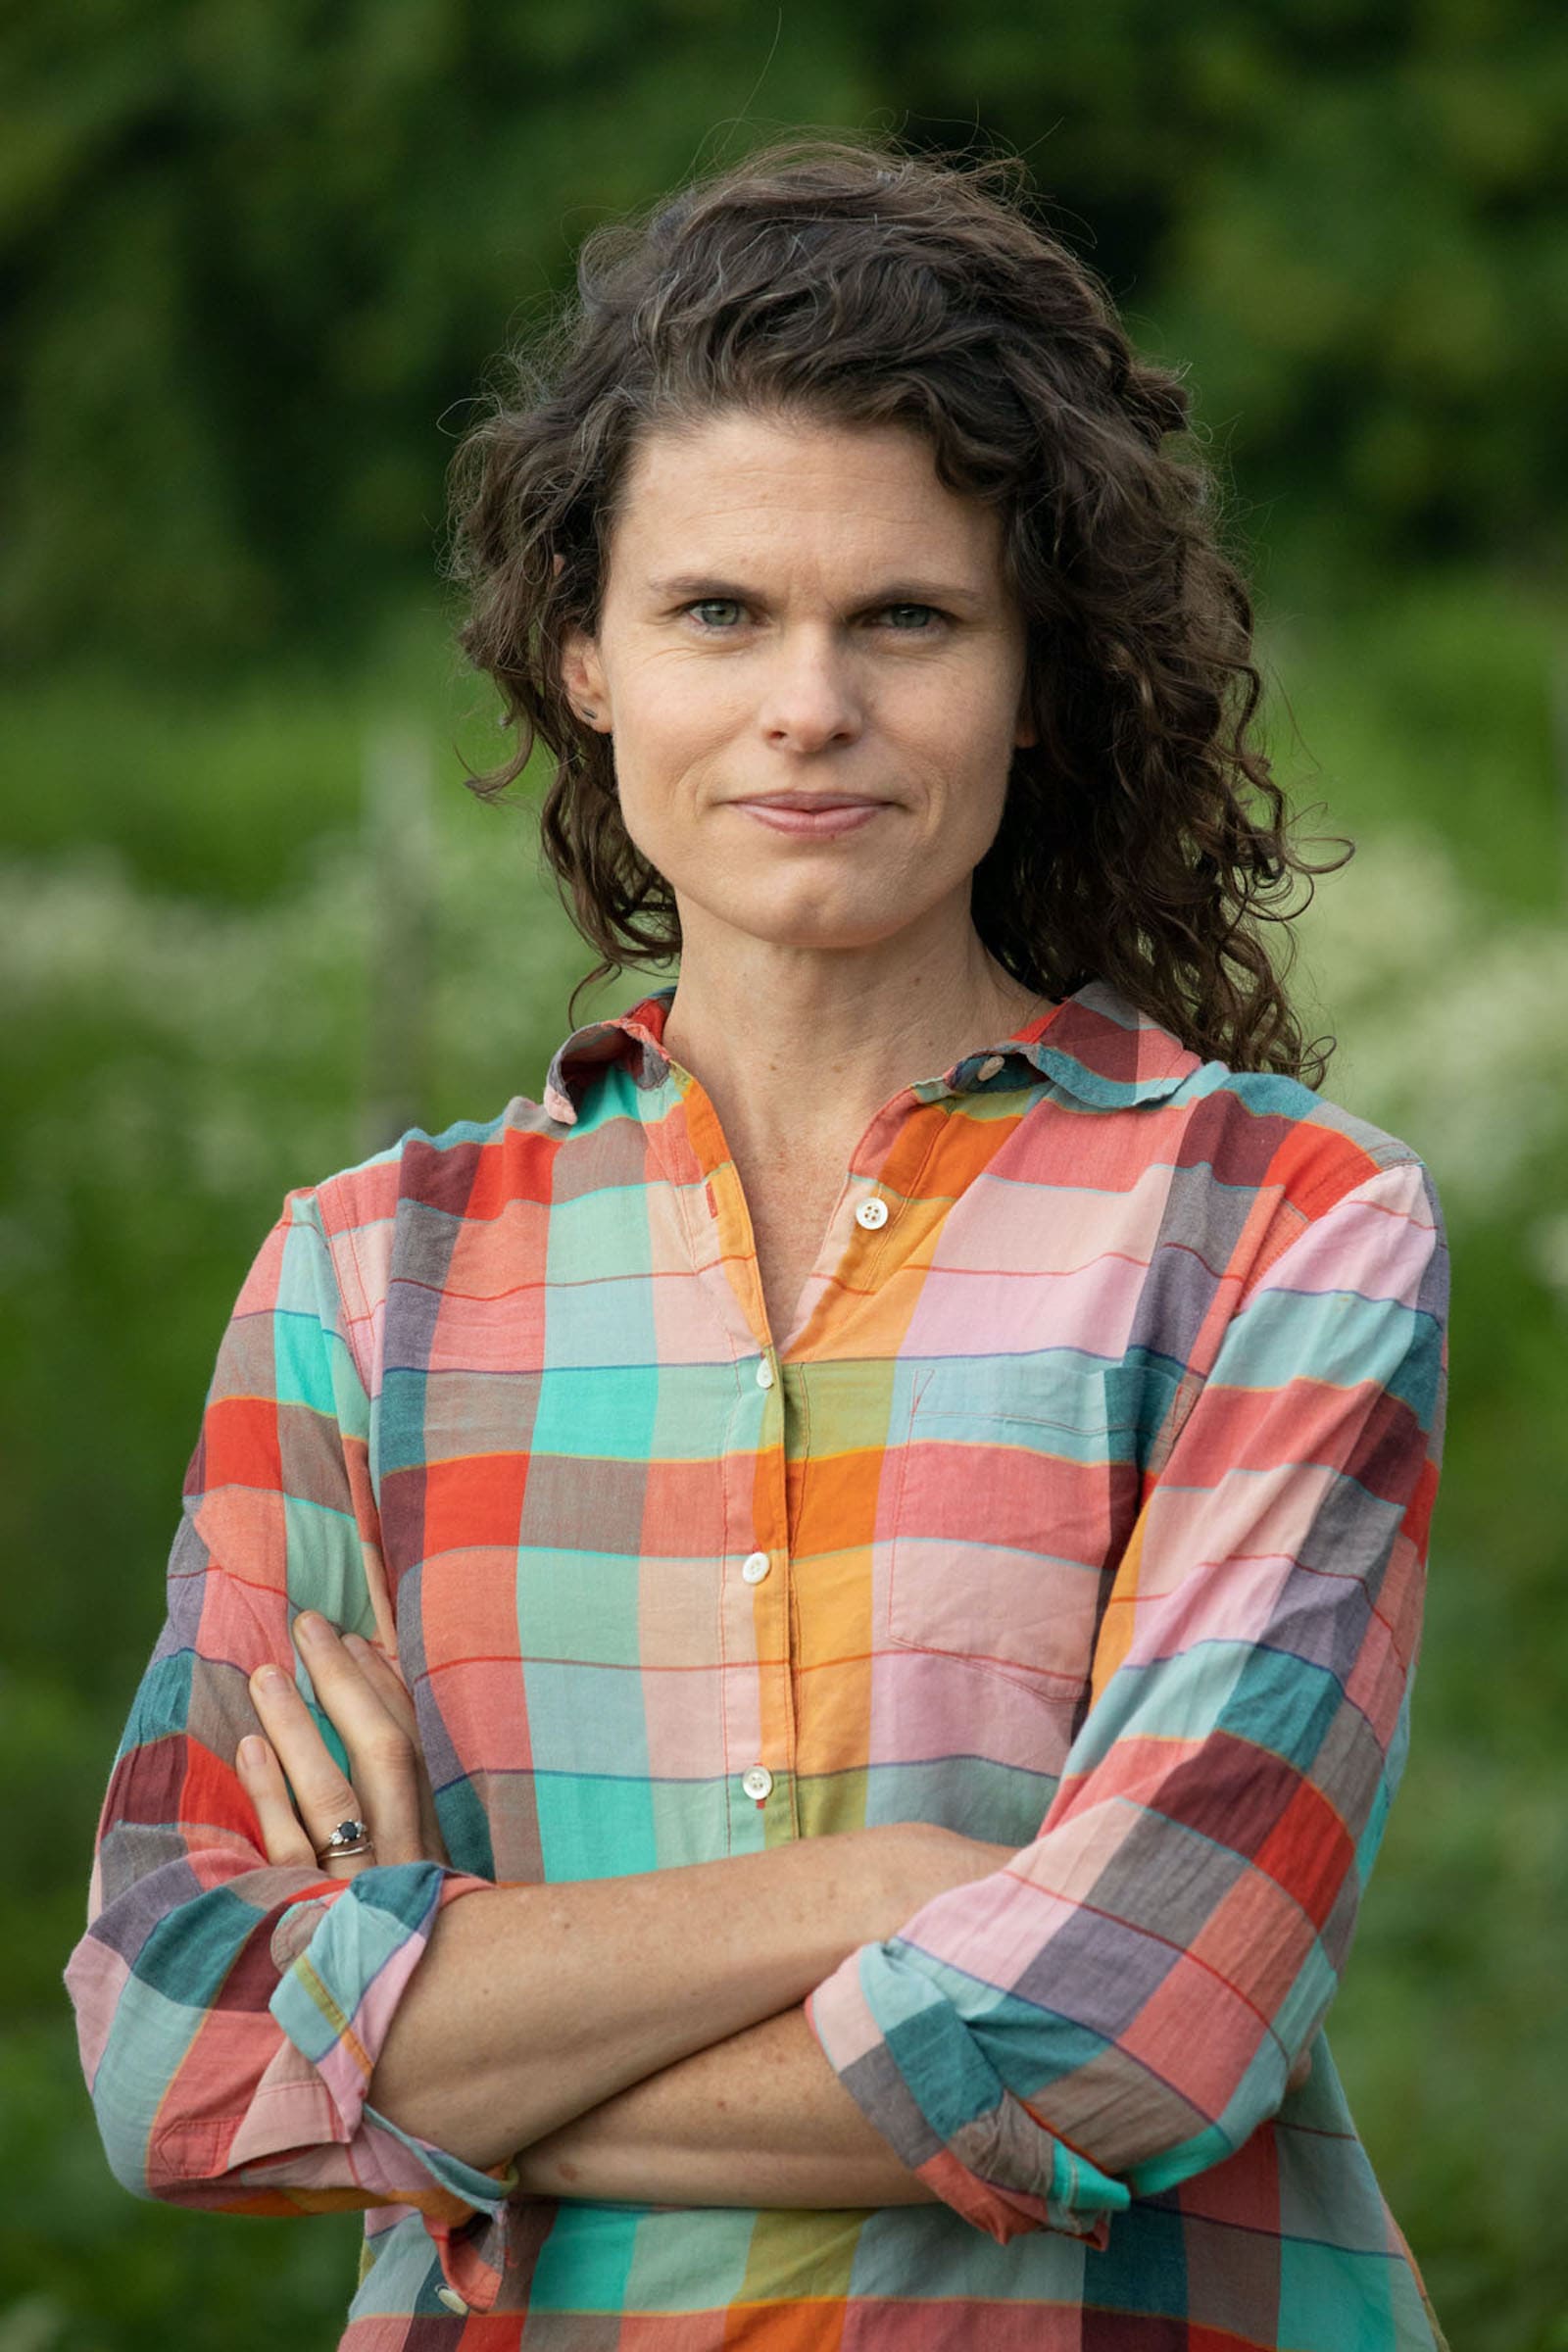 Co-founder of Farm Generations Coop, Lindsey Shute